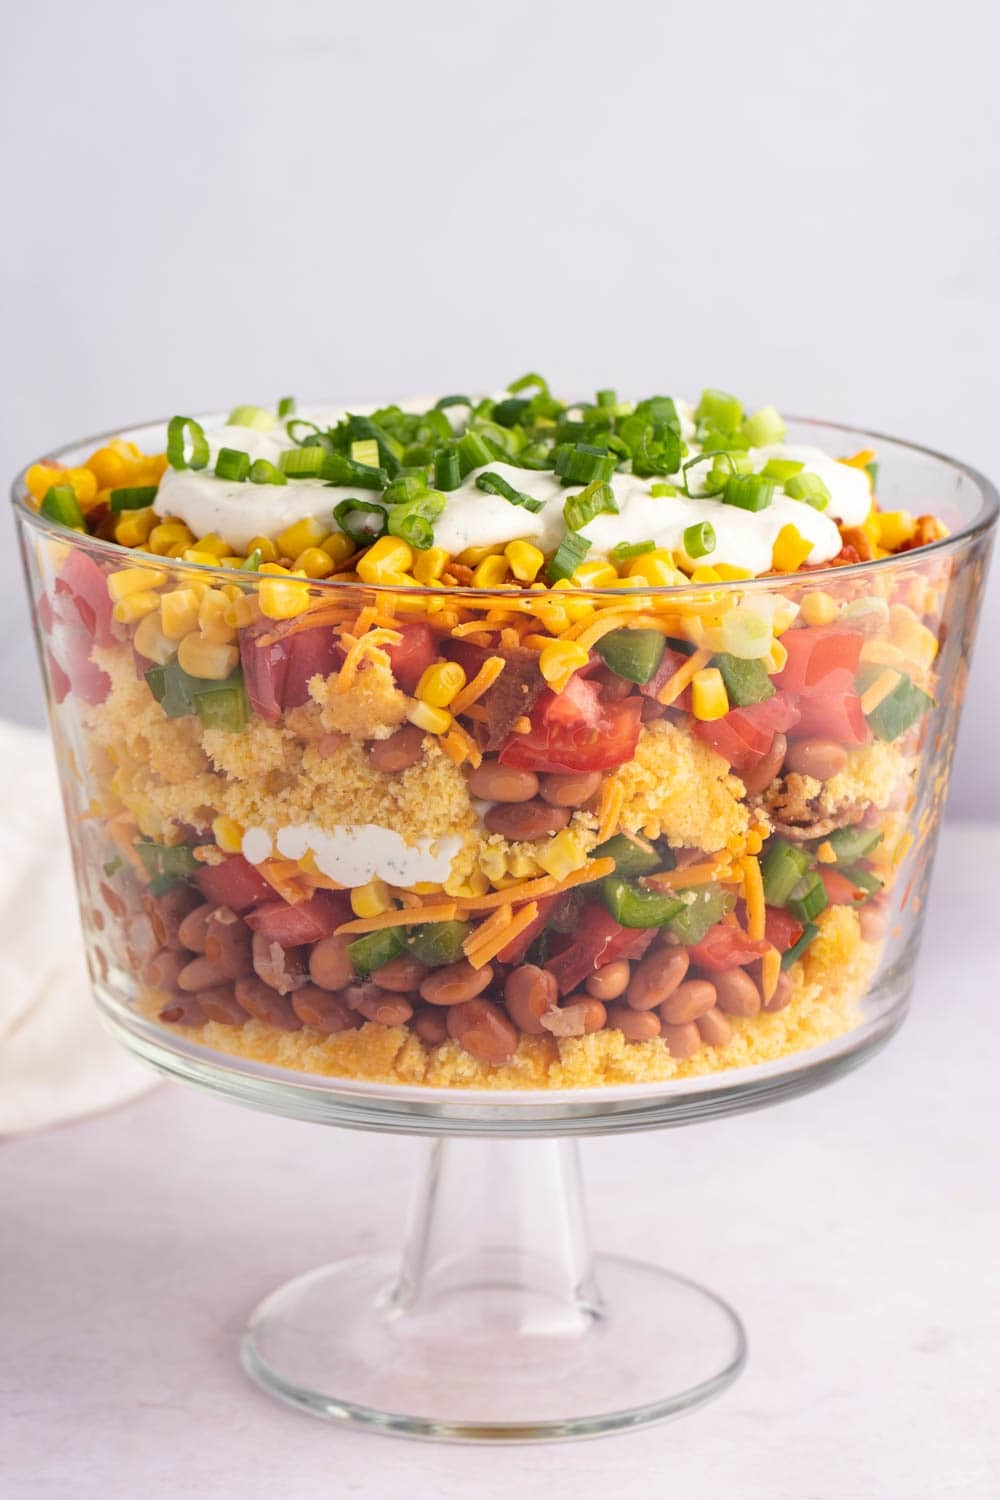 Layered Cornbread Salad with Tomatoes, Bell Peppers, Beans, Onions, Cheese and Bacon, Served on a Huge Glass Bowl